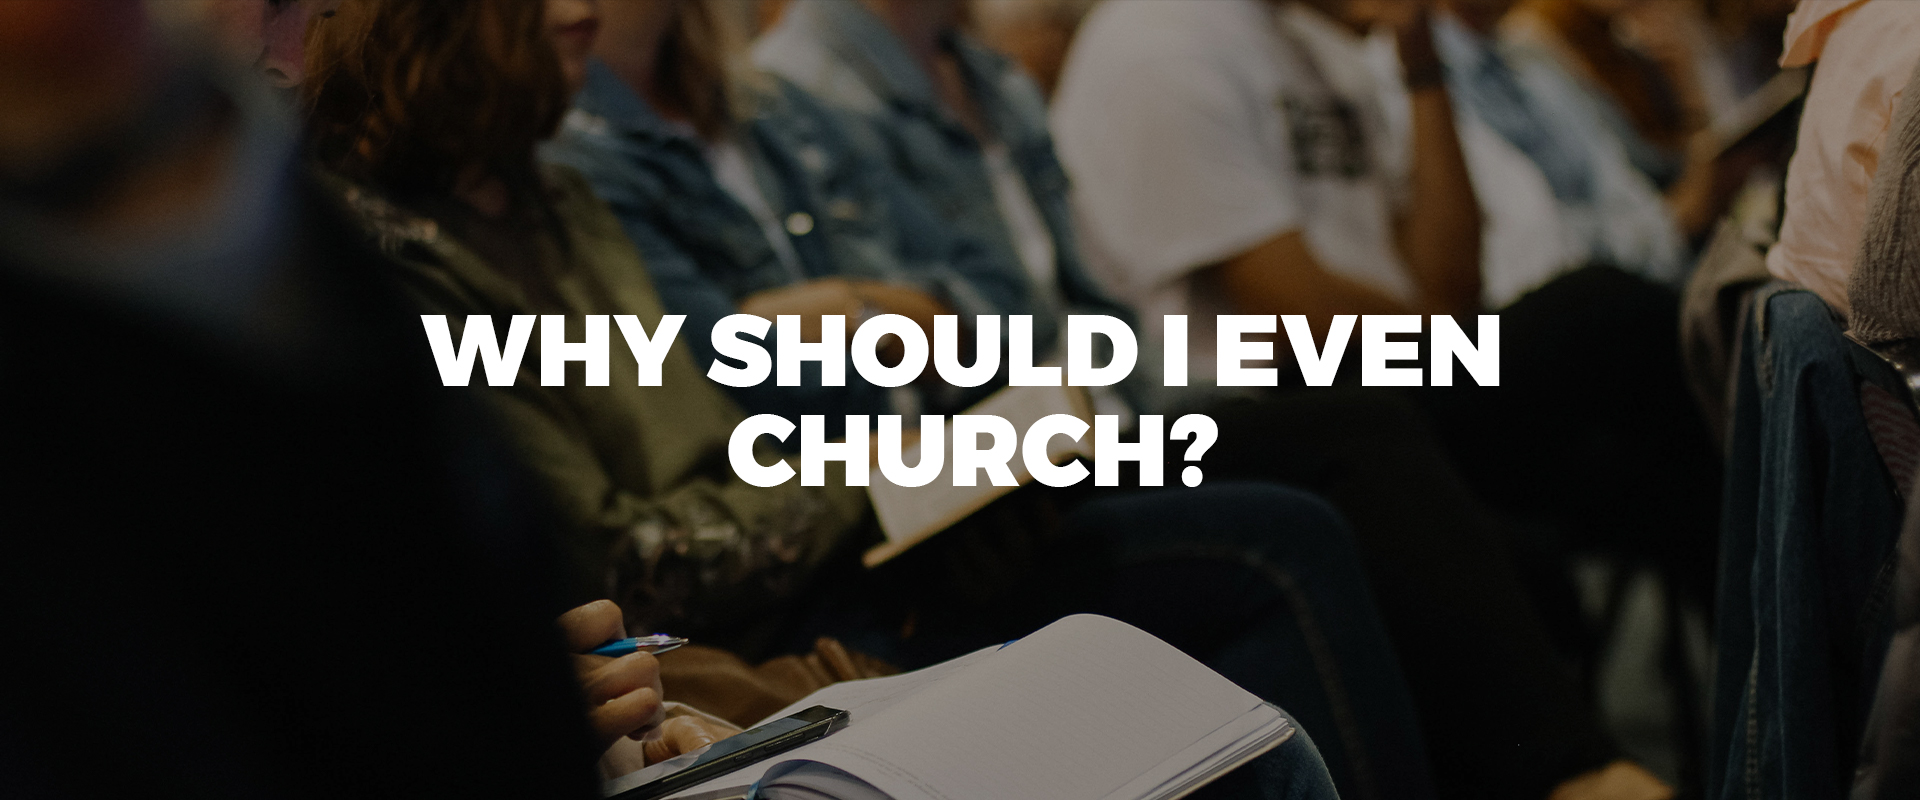 Why Should I Even Church?